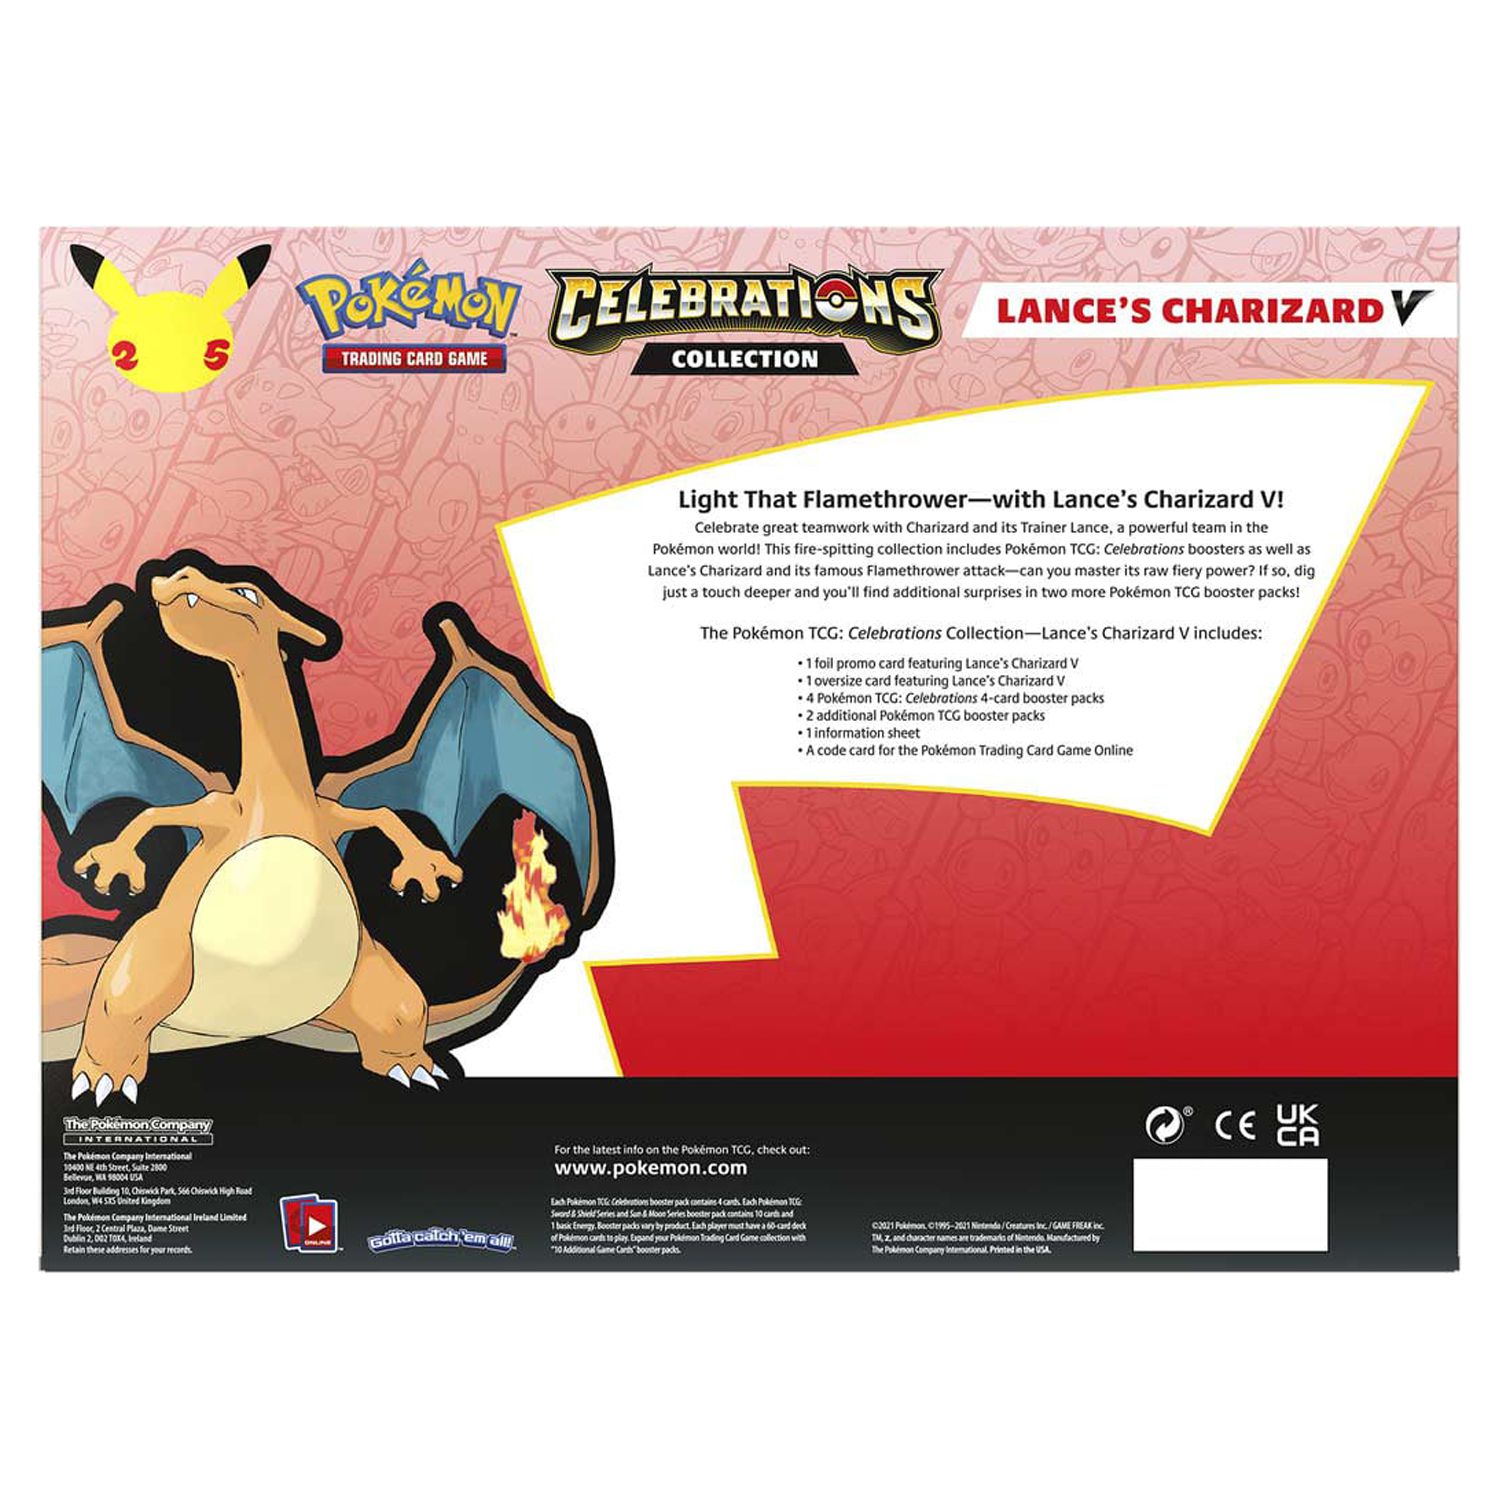 Pokémon Trading Card Games: Celebrations Collection (Lance's Charizard V) - image 4 of 7